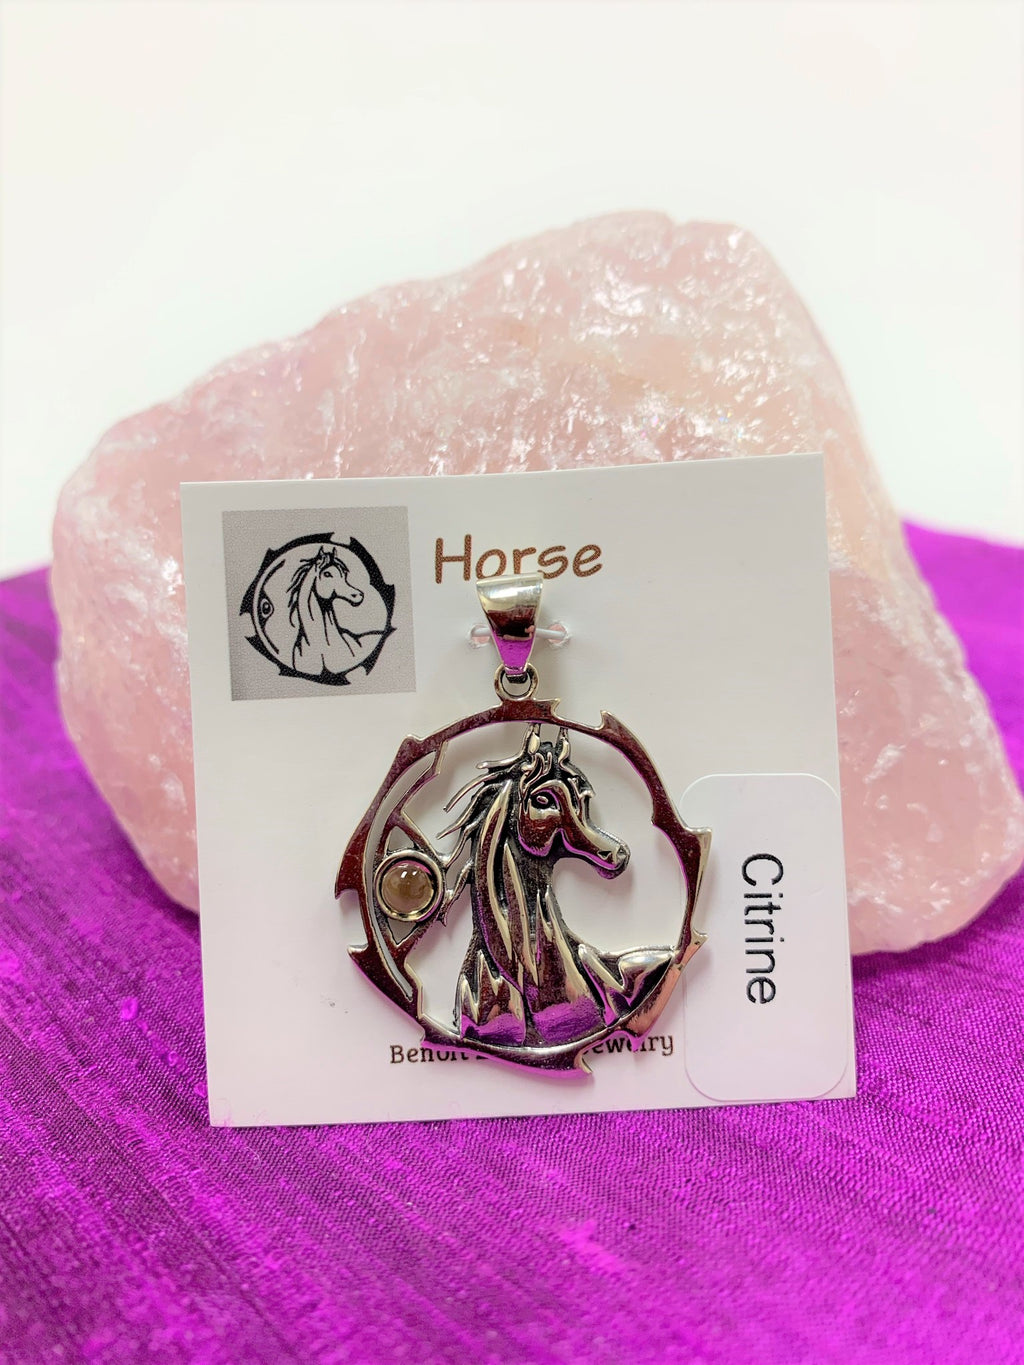 Sterling silver horse spirit animal pendant, accented with a citrine gemstone. The horse is set within an open, stylized circle with the gemstone on the side (horse and circle are sterling). Wear your spirit animal's energy everywhere you go! Pendant only - necklace chain not included.